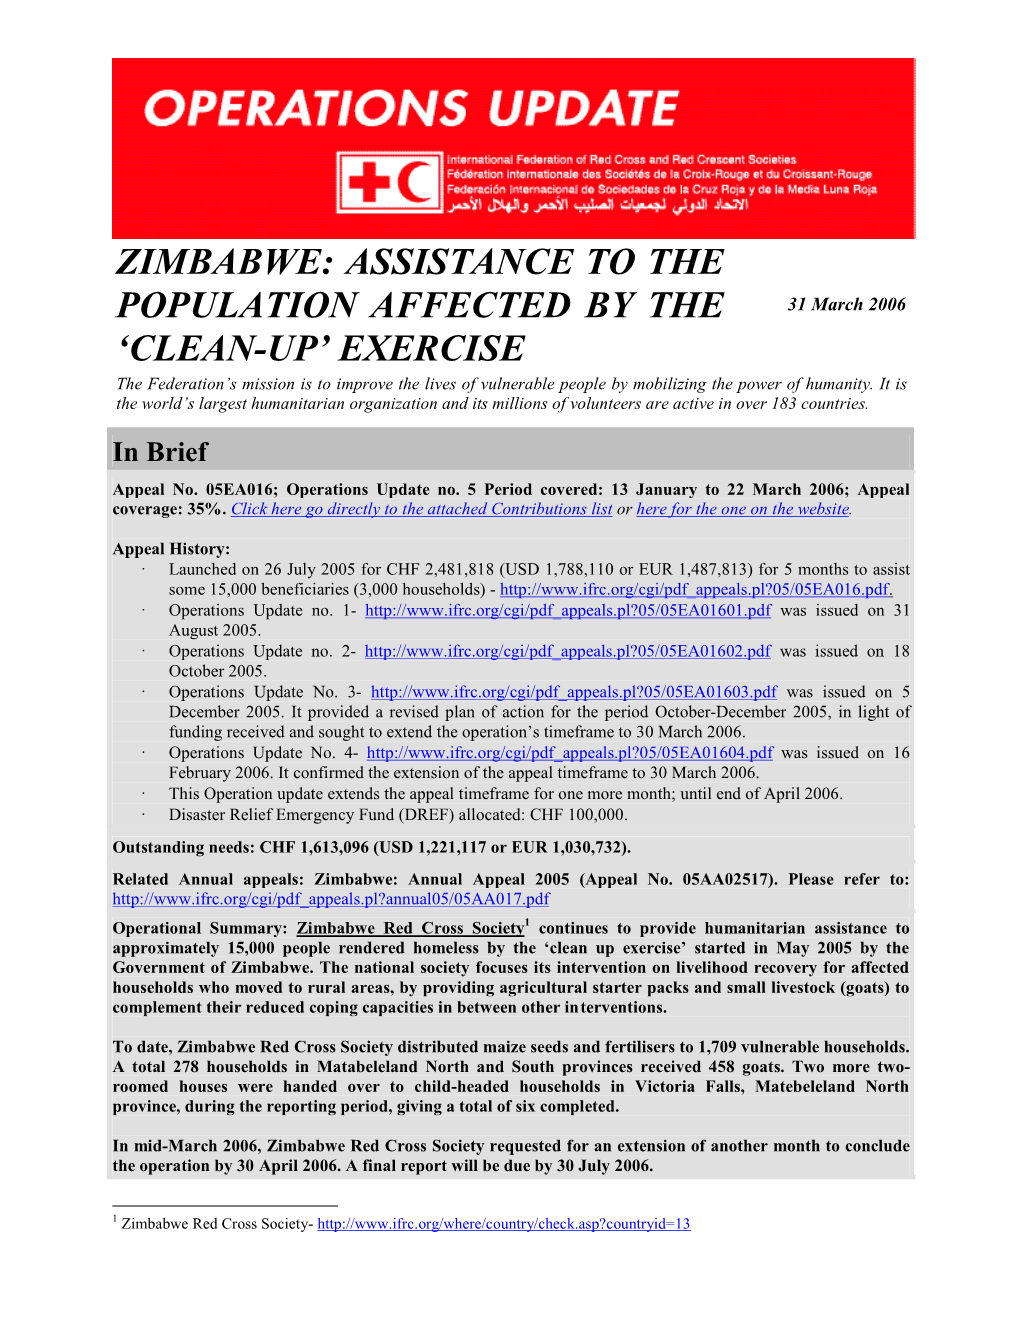 IFRC- Zimbabwe: Assistance to the Population Affected by the ‚Clean-Up